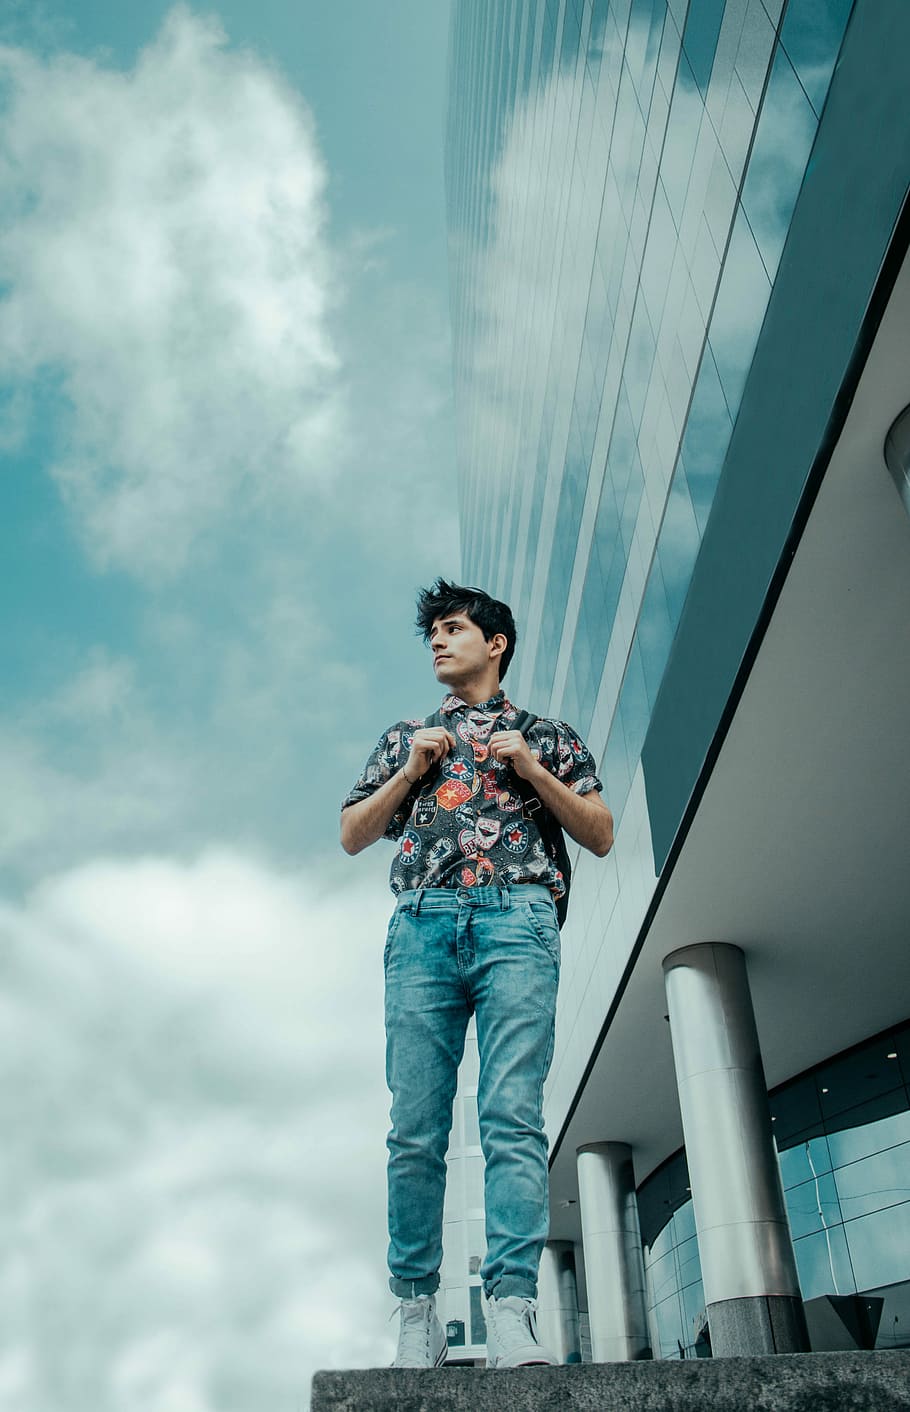 man walking beside glass building under cloudy blue sky during daytime, man in blue denim pants standing on concrete floors looking on right, HD wallpaper